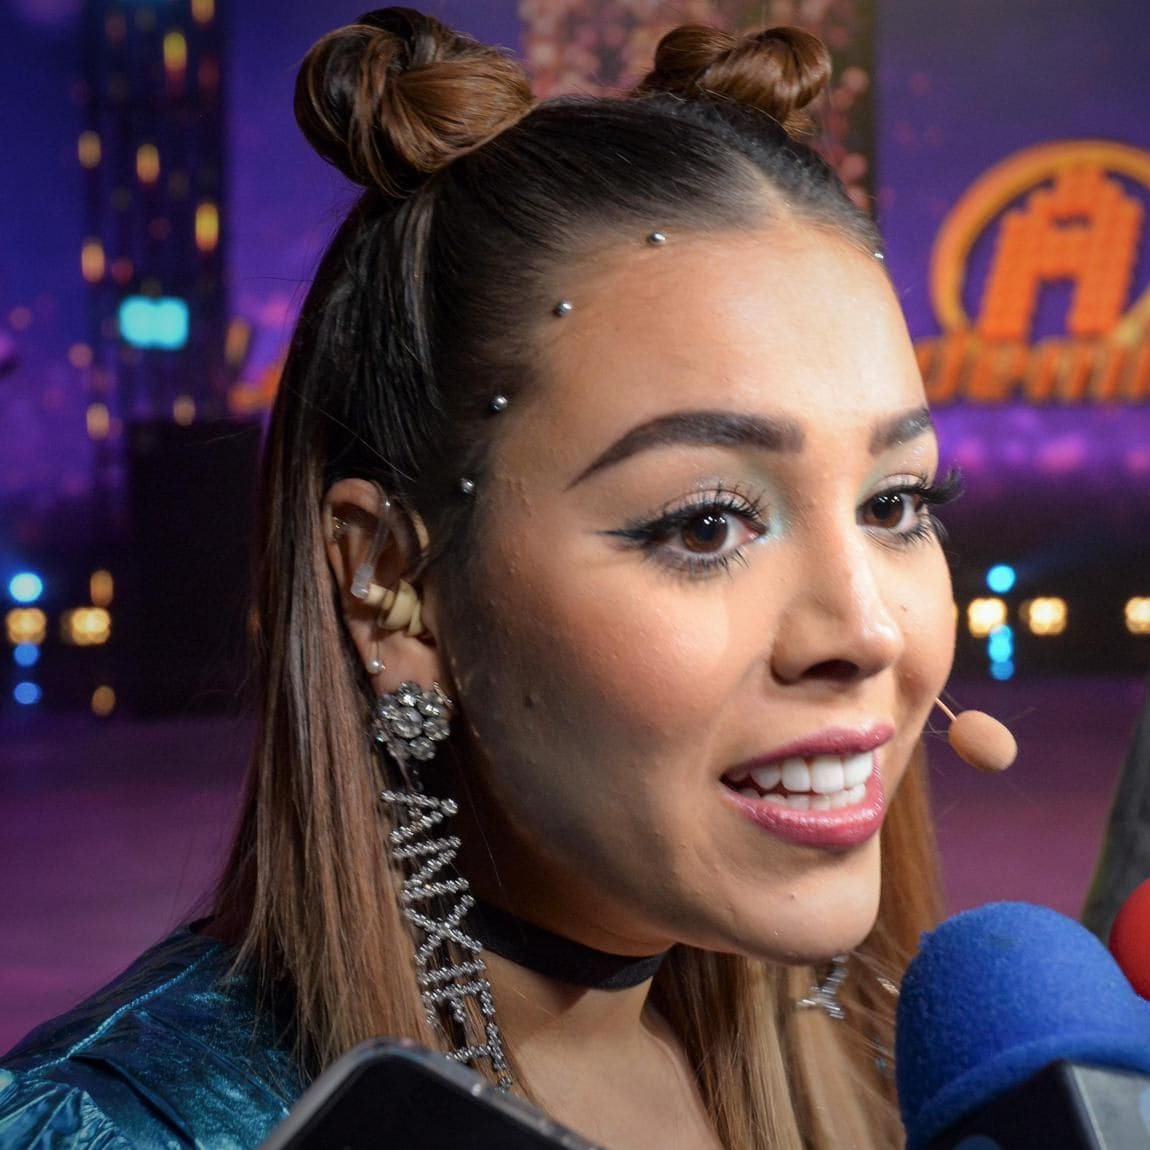 Danna Paola with jewels embedded along her hairlinearte frontal del peinado!